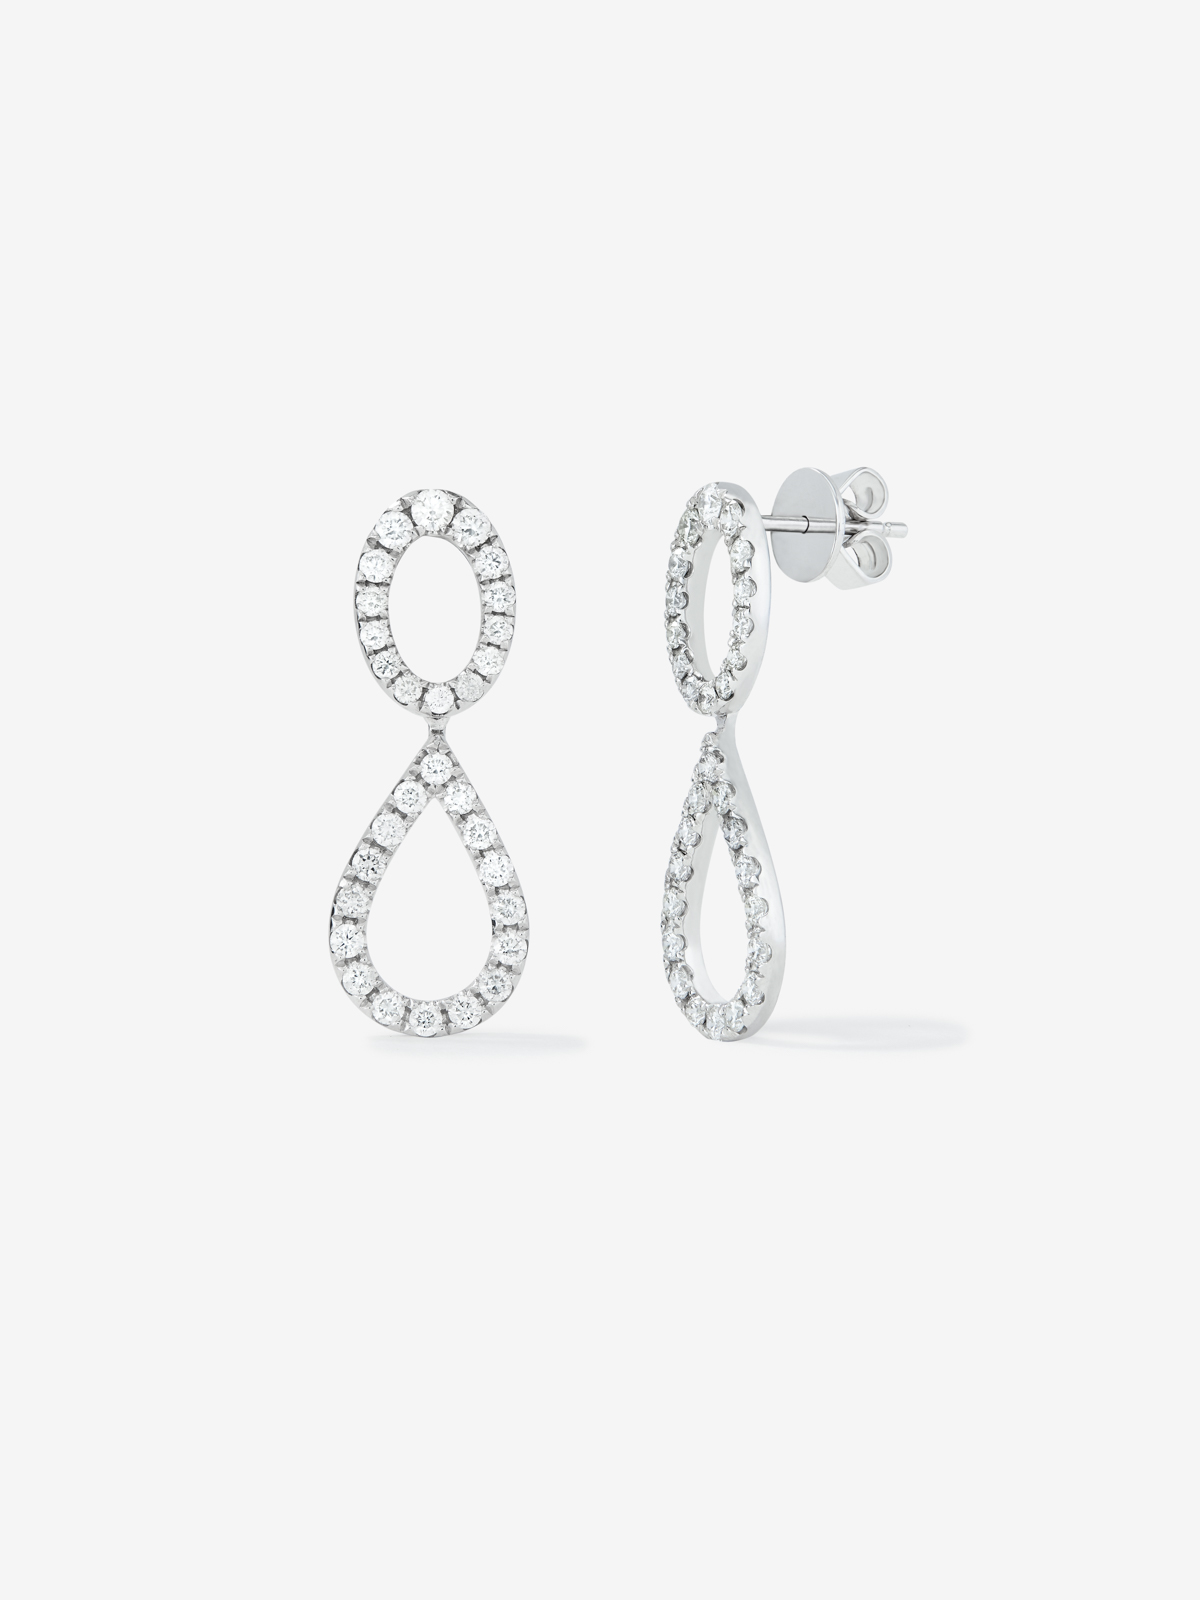 Oval double hoop earrings in 18kt white gold with diamonds